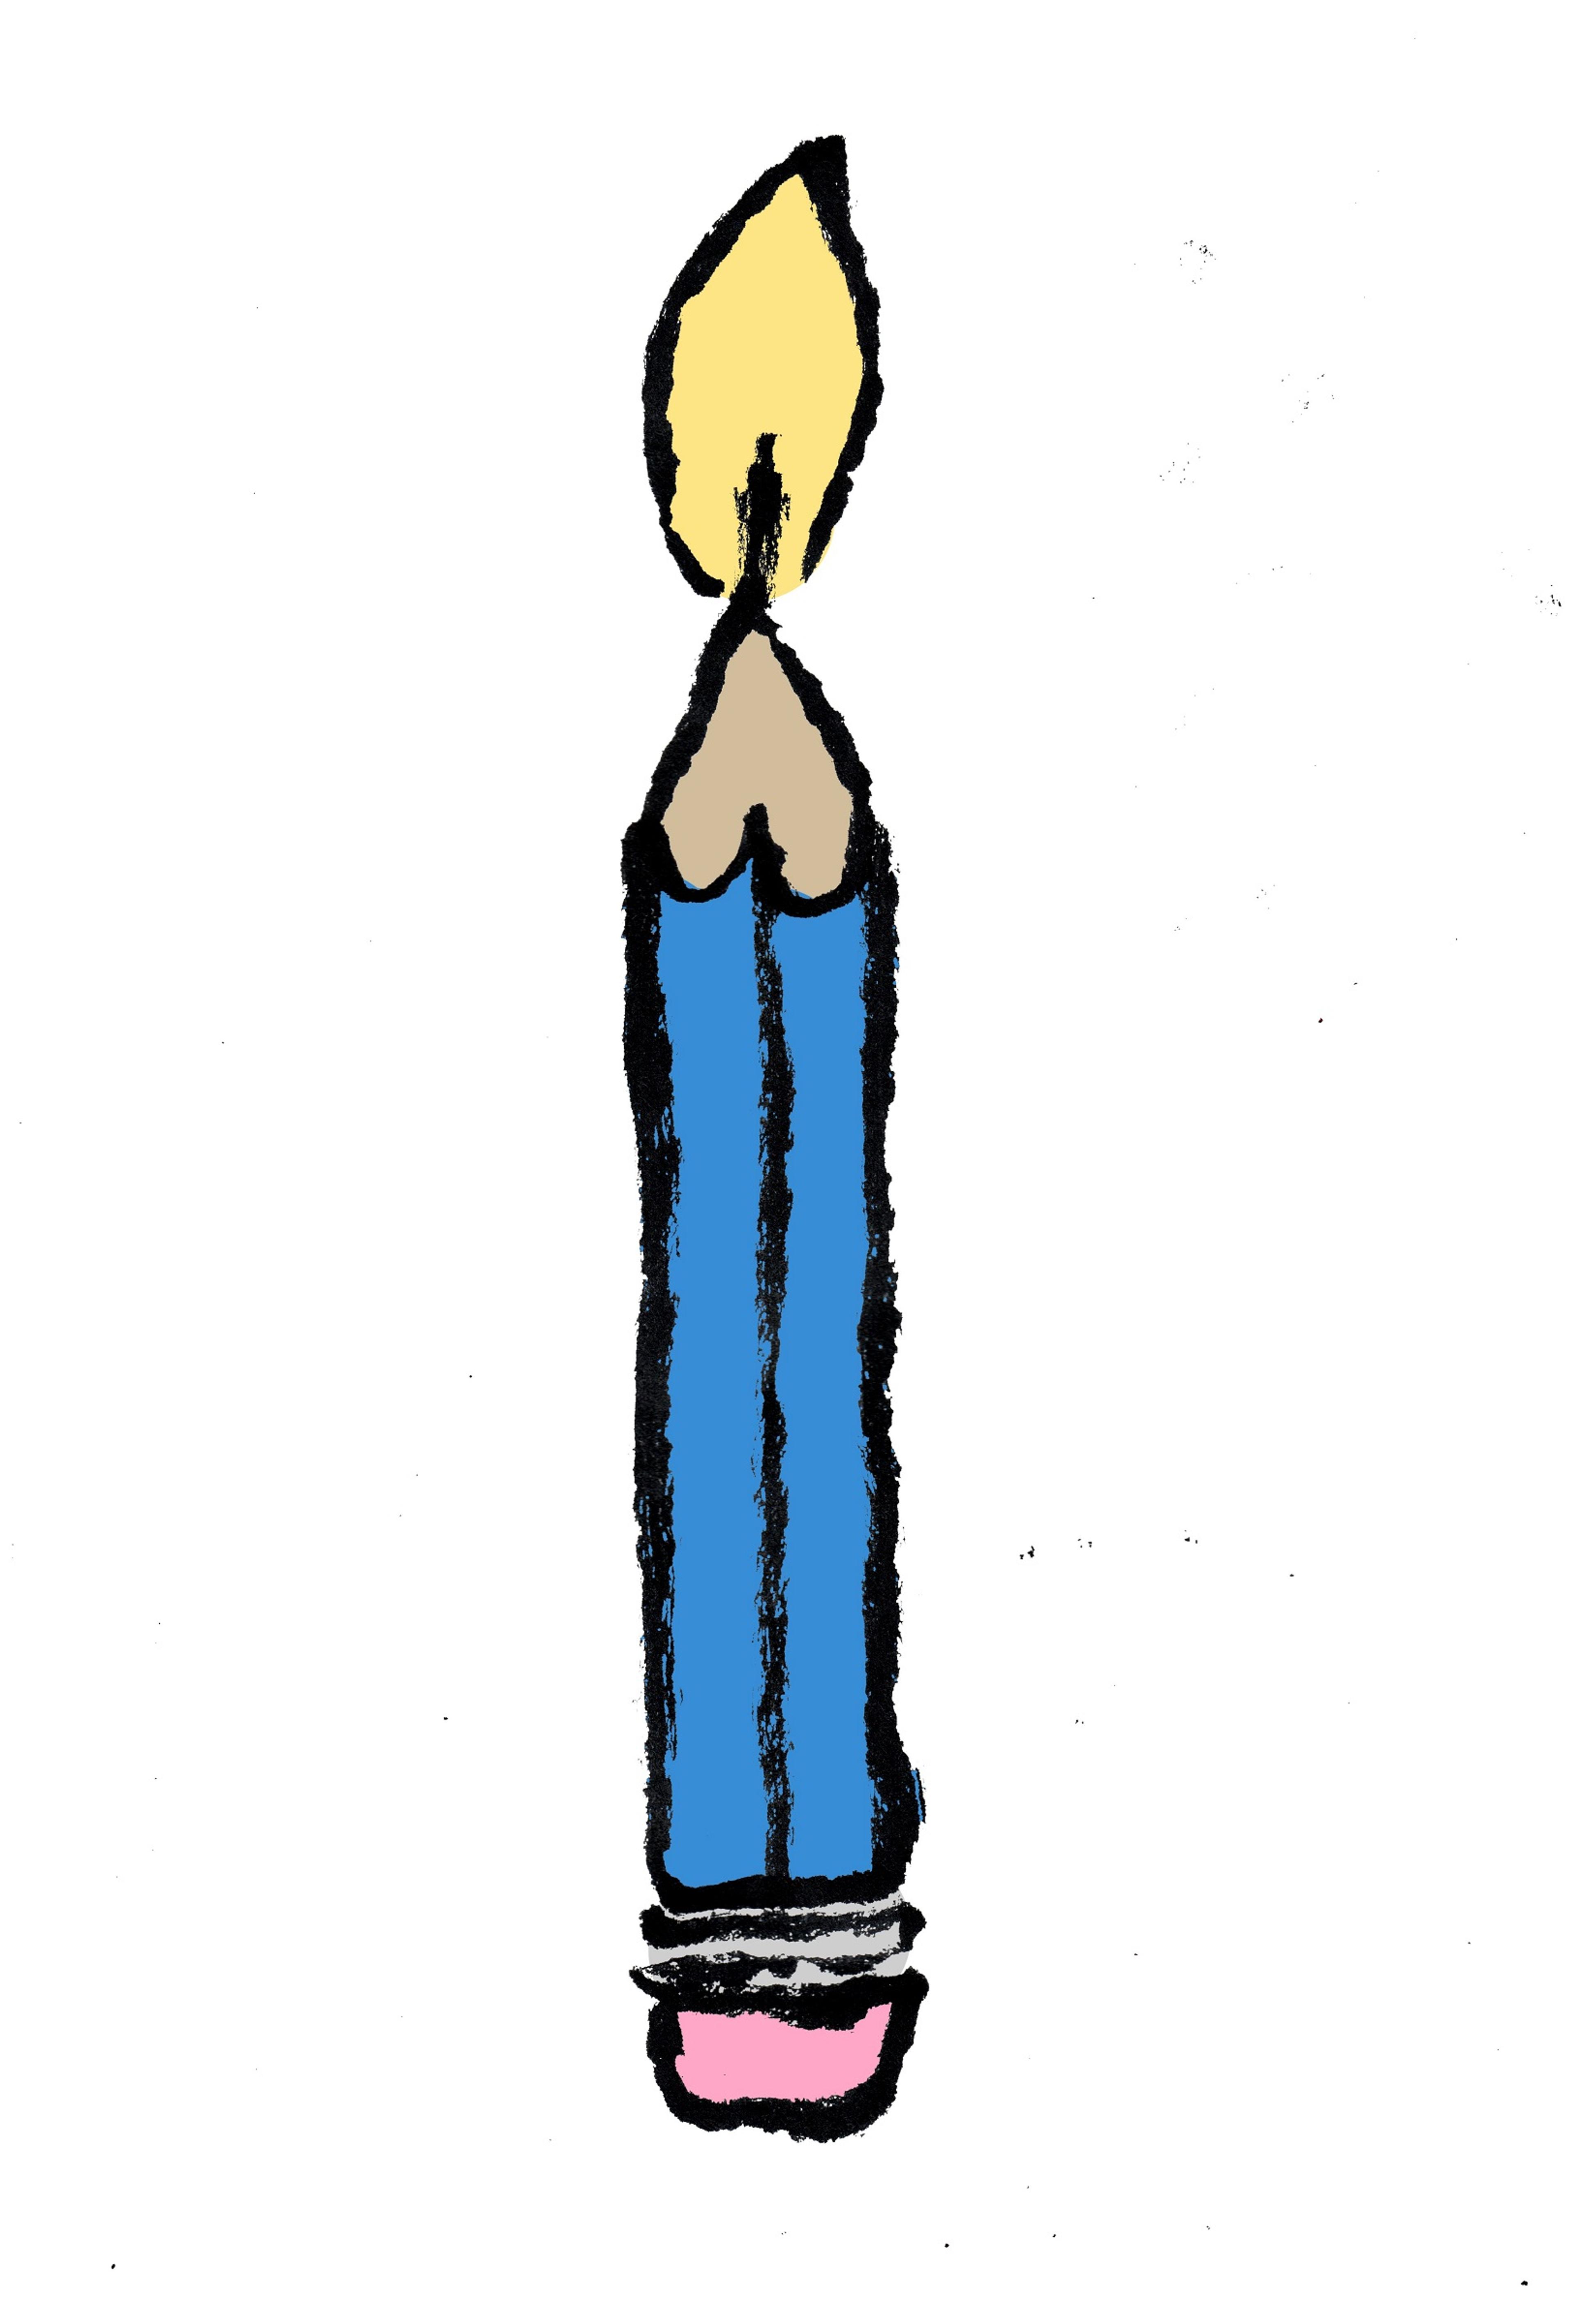 Illustration of a pencil with a flaming end, like a candle